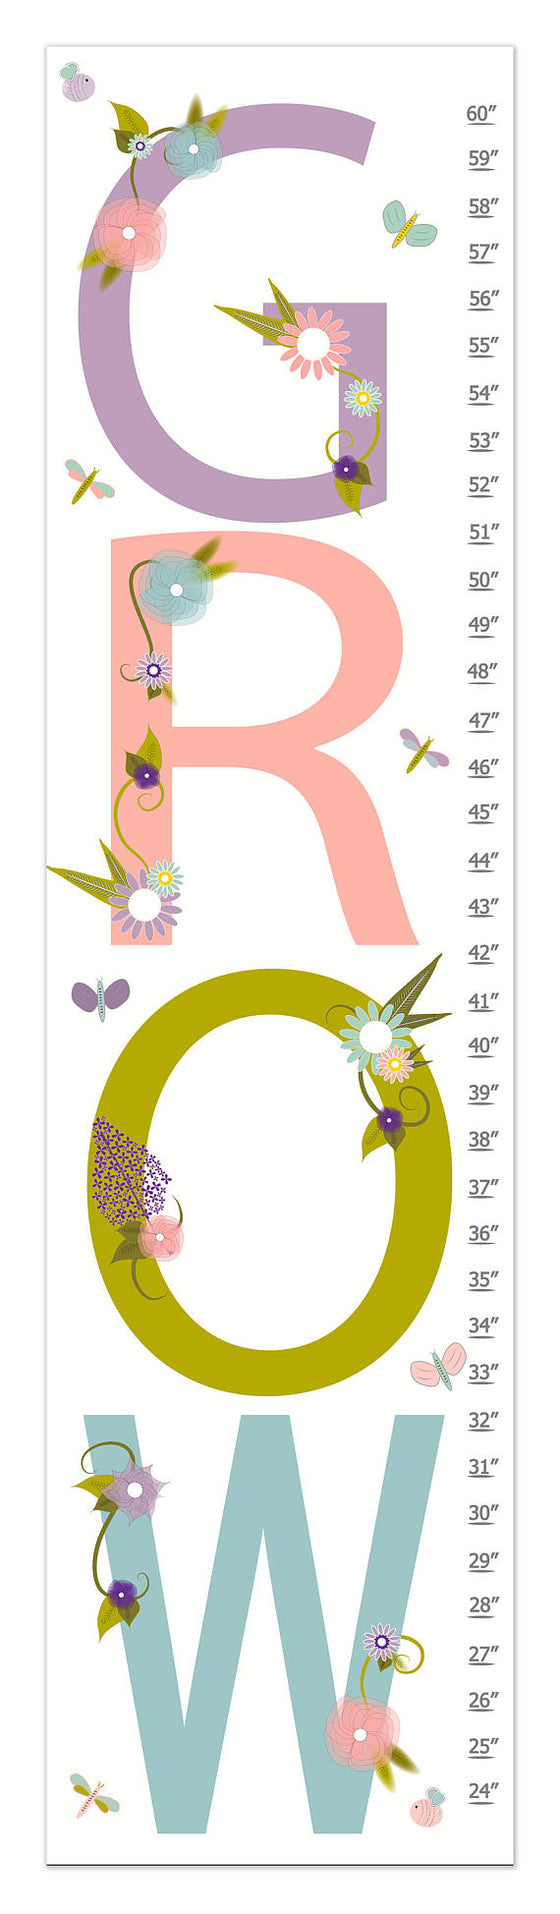 Grow Personalized Growth Chart - Nursery Decor - Baby Gifts